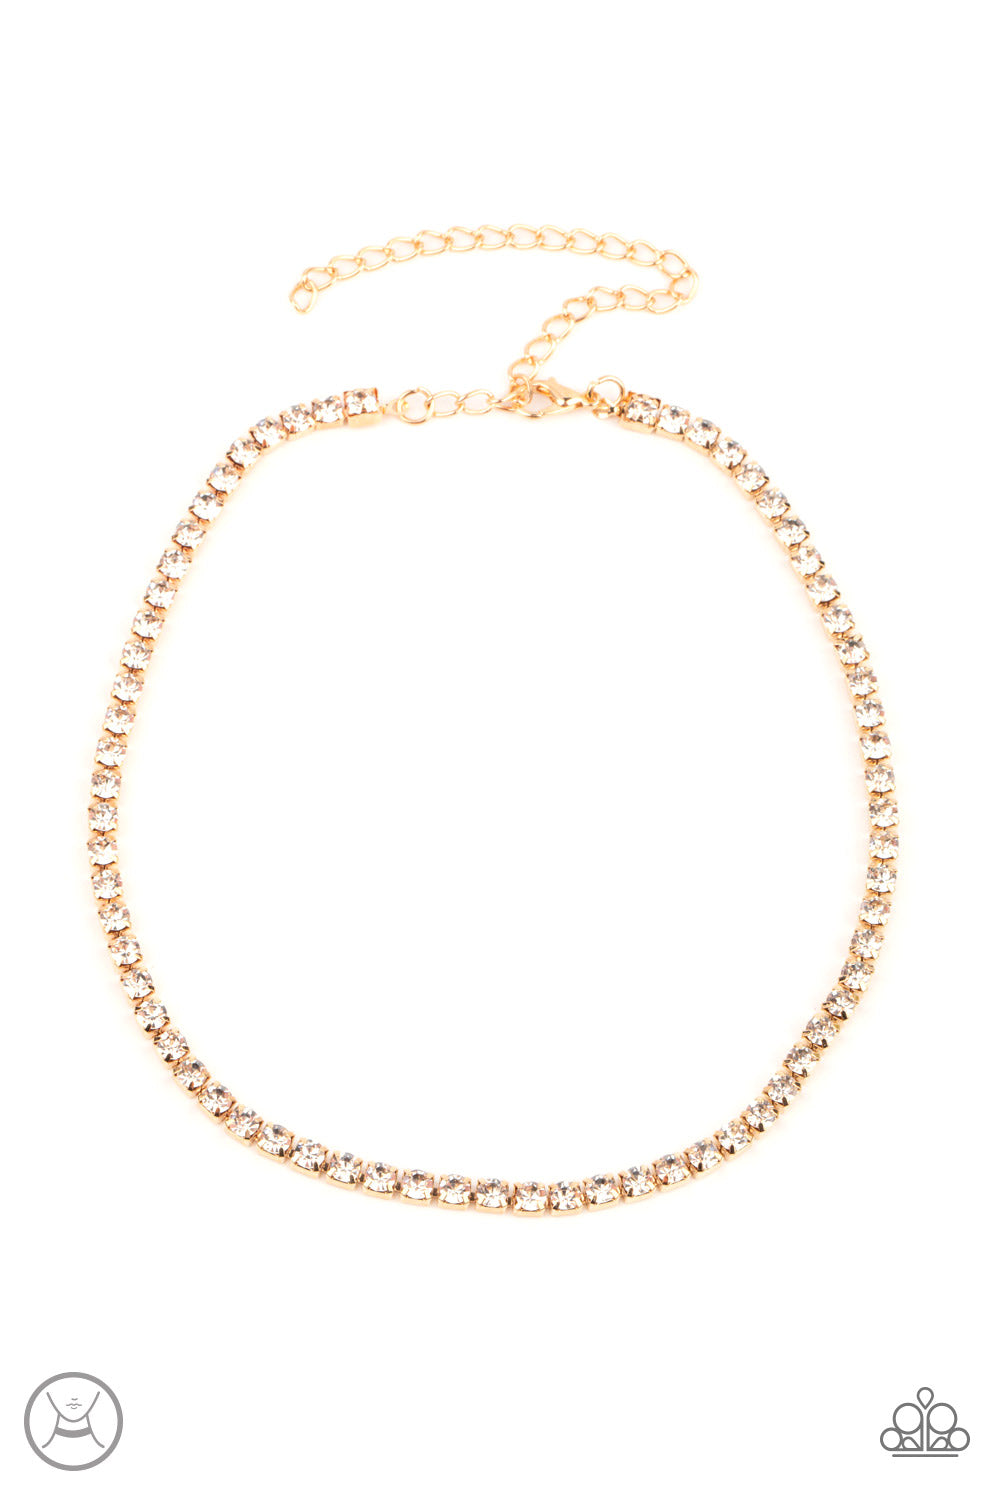 Starlight Radiance Gold Choker Necklace - Paparazzi Accessories  A strand of brilliant white rhinestones set in classic gold fittings creates a stunningly radiant display across the collar. Features an adjustable clasp closure.  All Paparazzi Accessories are lead free and nickel free!  Sold as one individual choker necklace. Includes one pair of matching earrings.